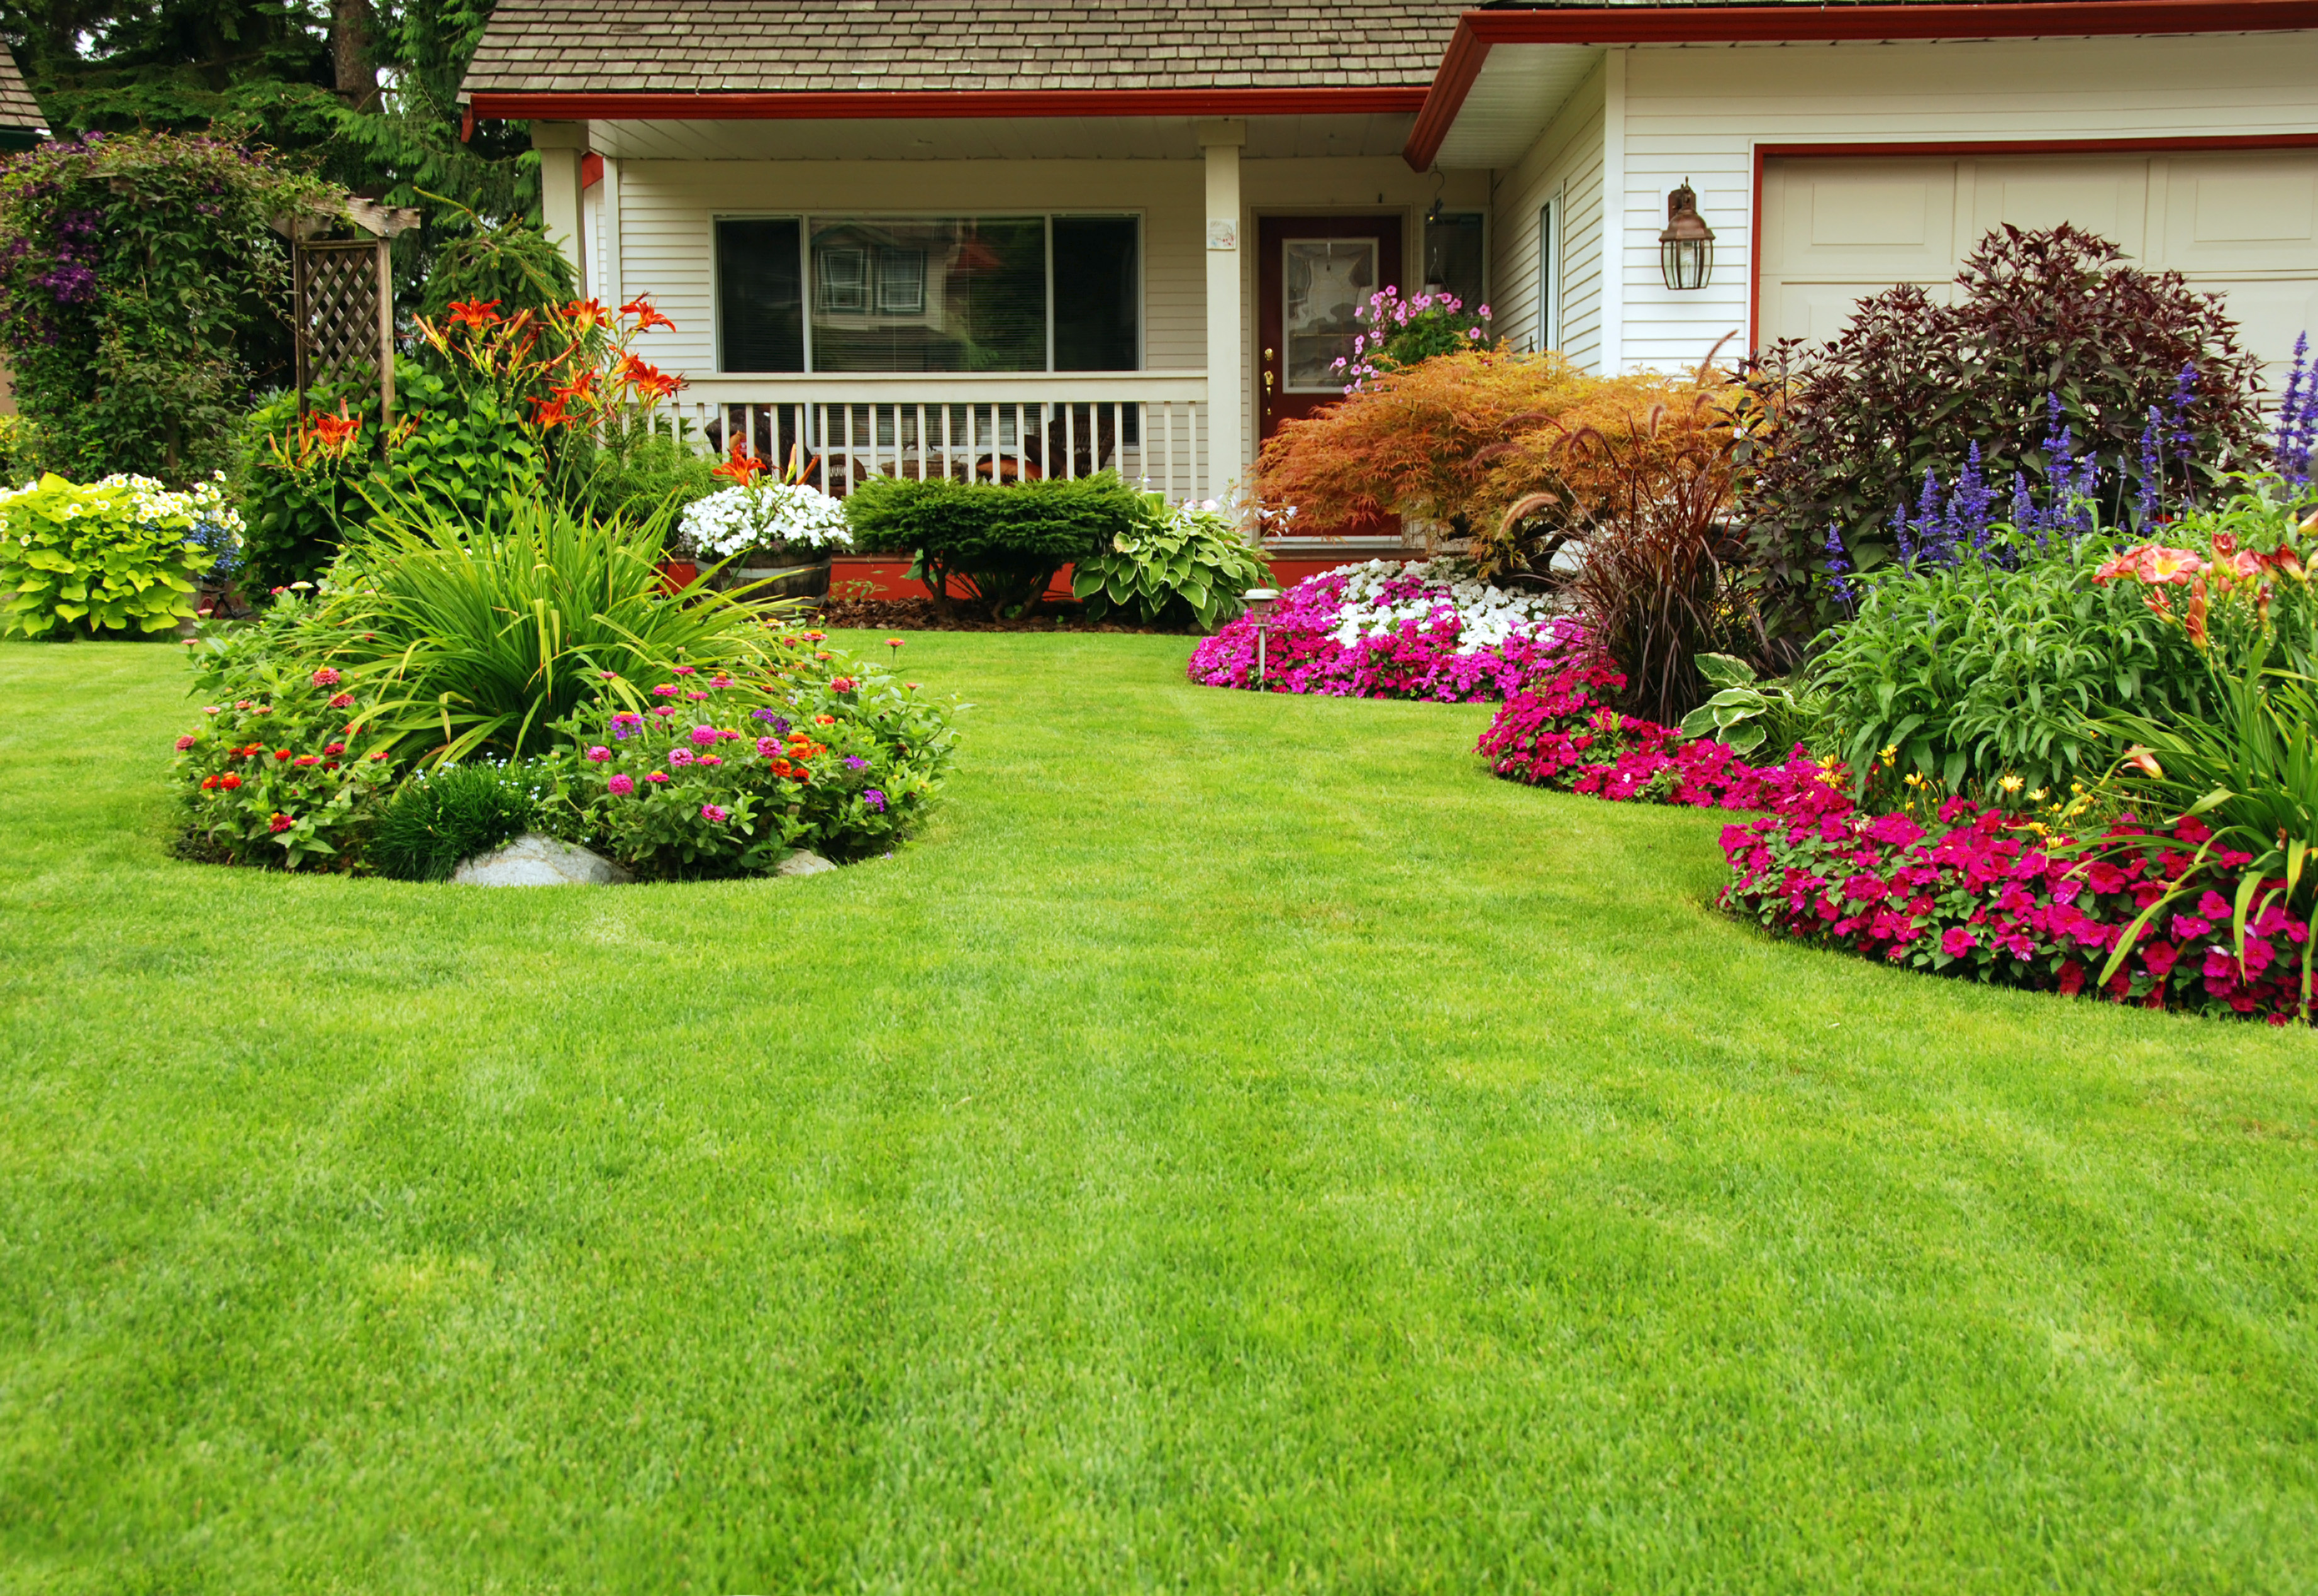 Spring Lawn Care Steps: A Complete Guide of Spring Lawn Care Tips